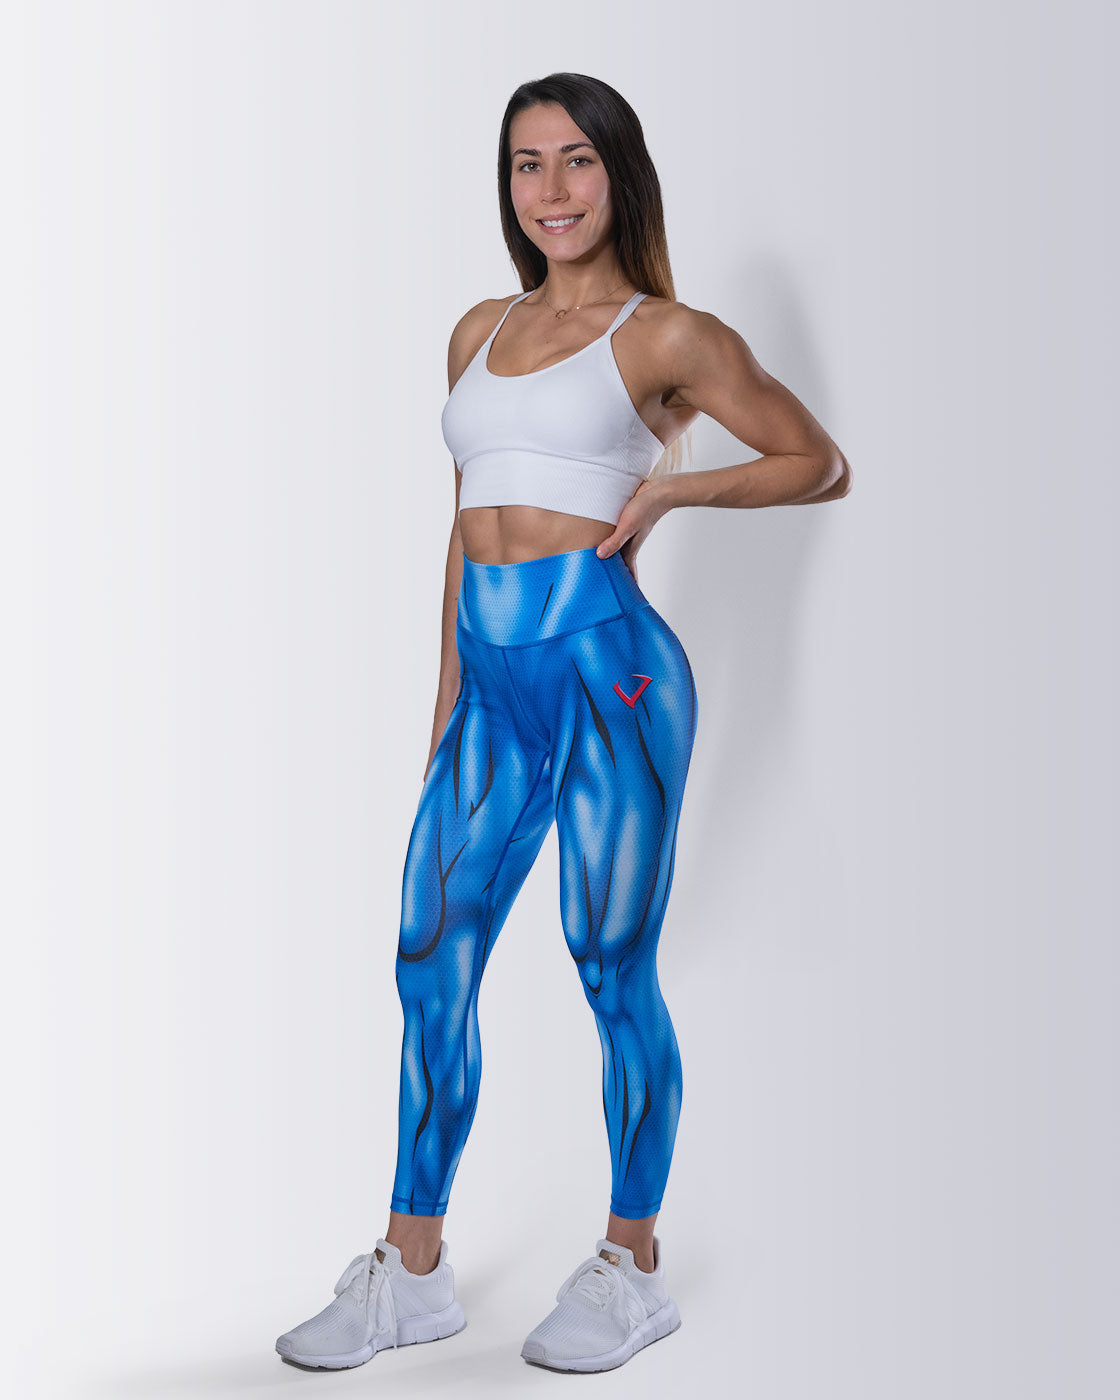 https://violatethedresscode.com/cdn/shop/products/violate-the-dress-code-vdc-sexy-superhero-leggings-with-muscle.jpg?v=1646282960&width=1120